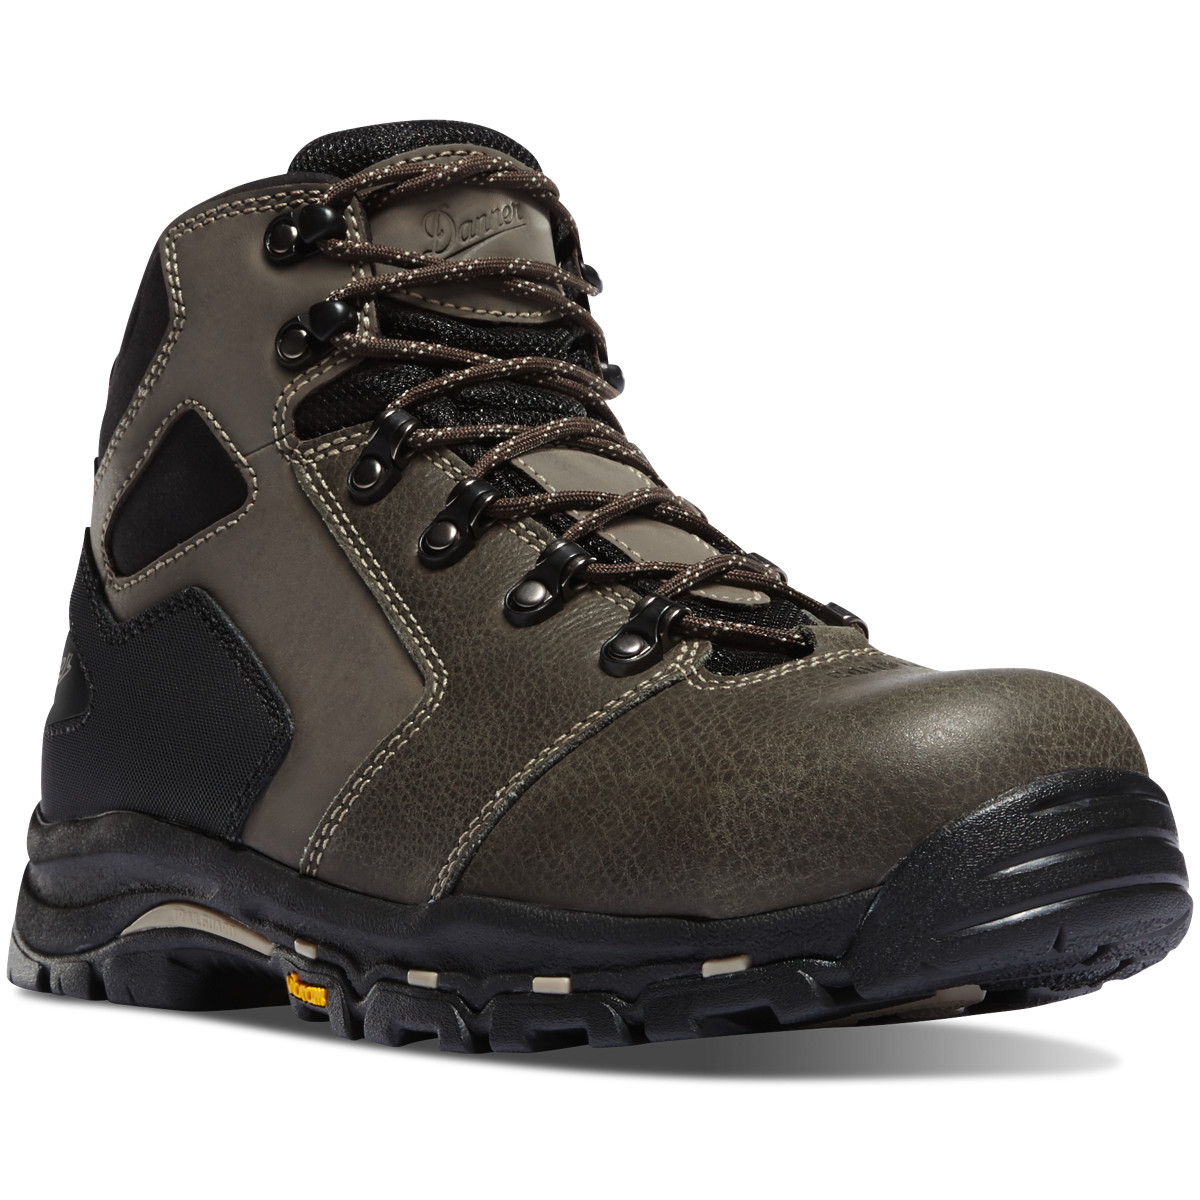 Danner Mens 13878 Vicious 4.5" Slate/Black Hot Weather Comp Toe NMT Safety Boots 